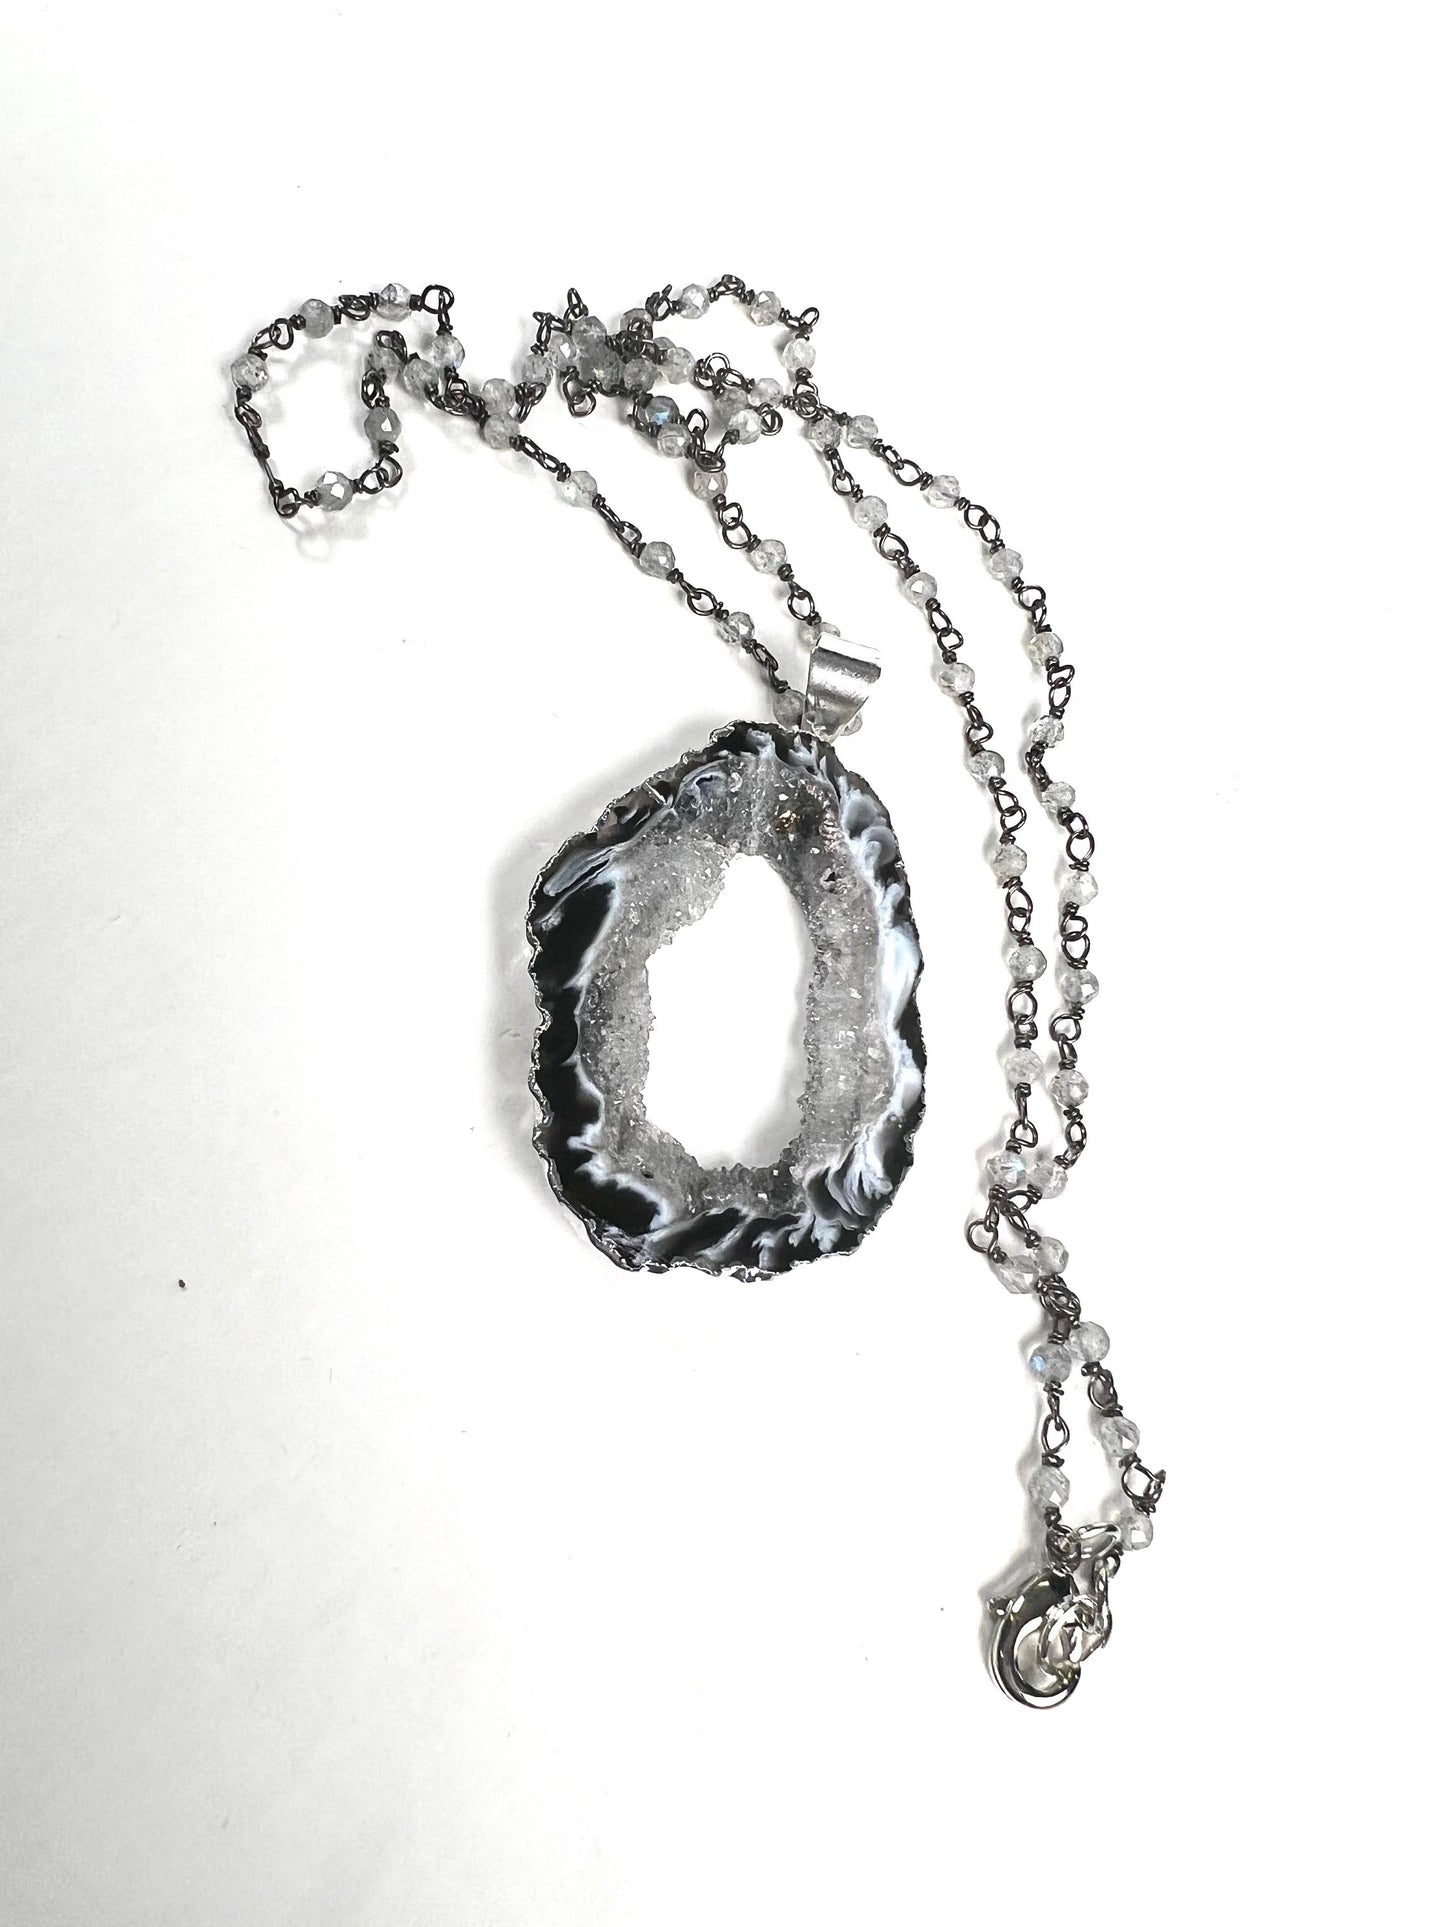 Genuine Botswana Agate Druzy Geode Gemstone Pendant and Silver Faceted Labradorite Beaded Rosary Chain Necklace